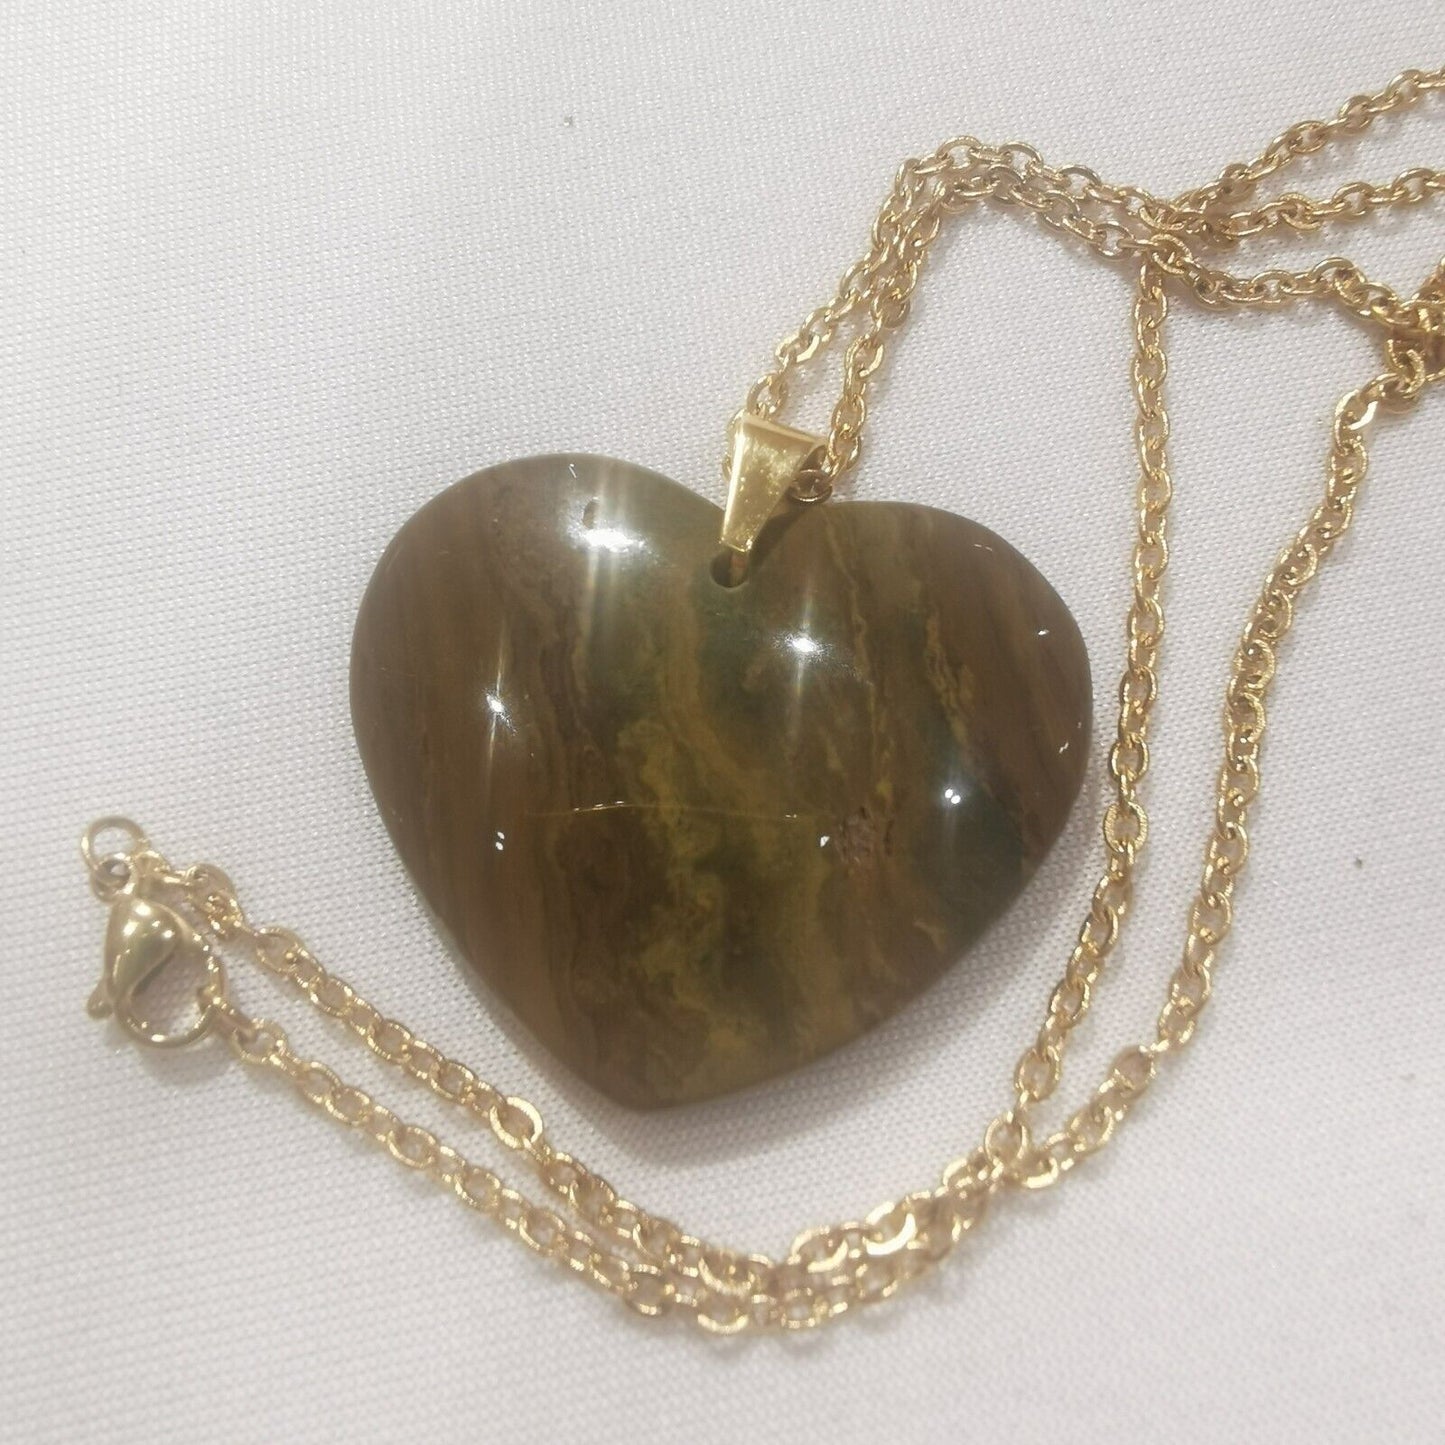 Beautiful Jasper Heart Pendant With Stainless Steel Chain Necklace